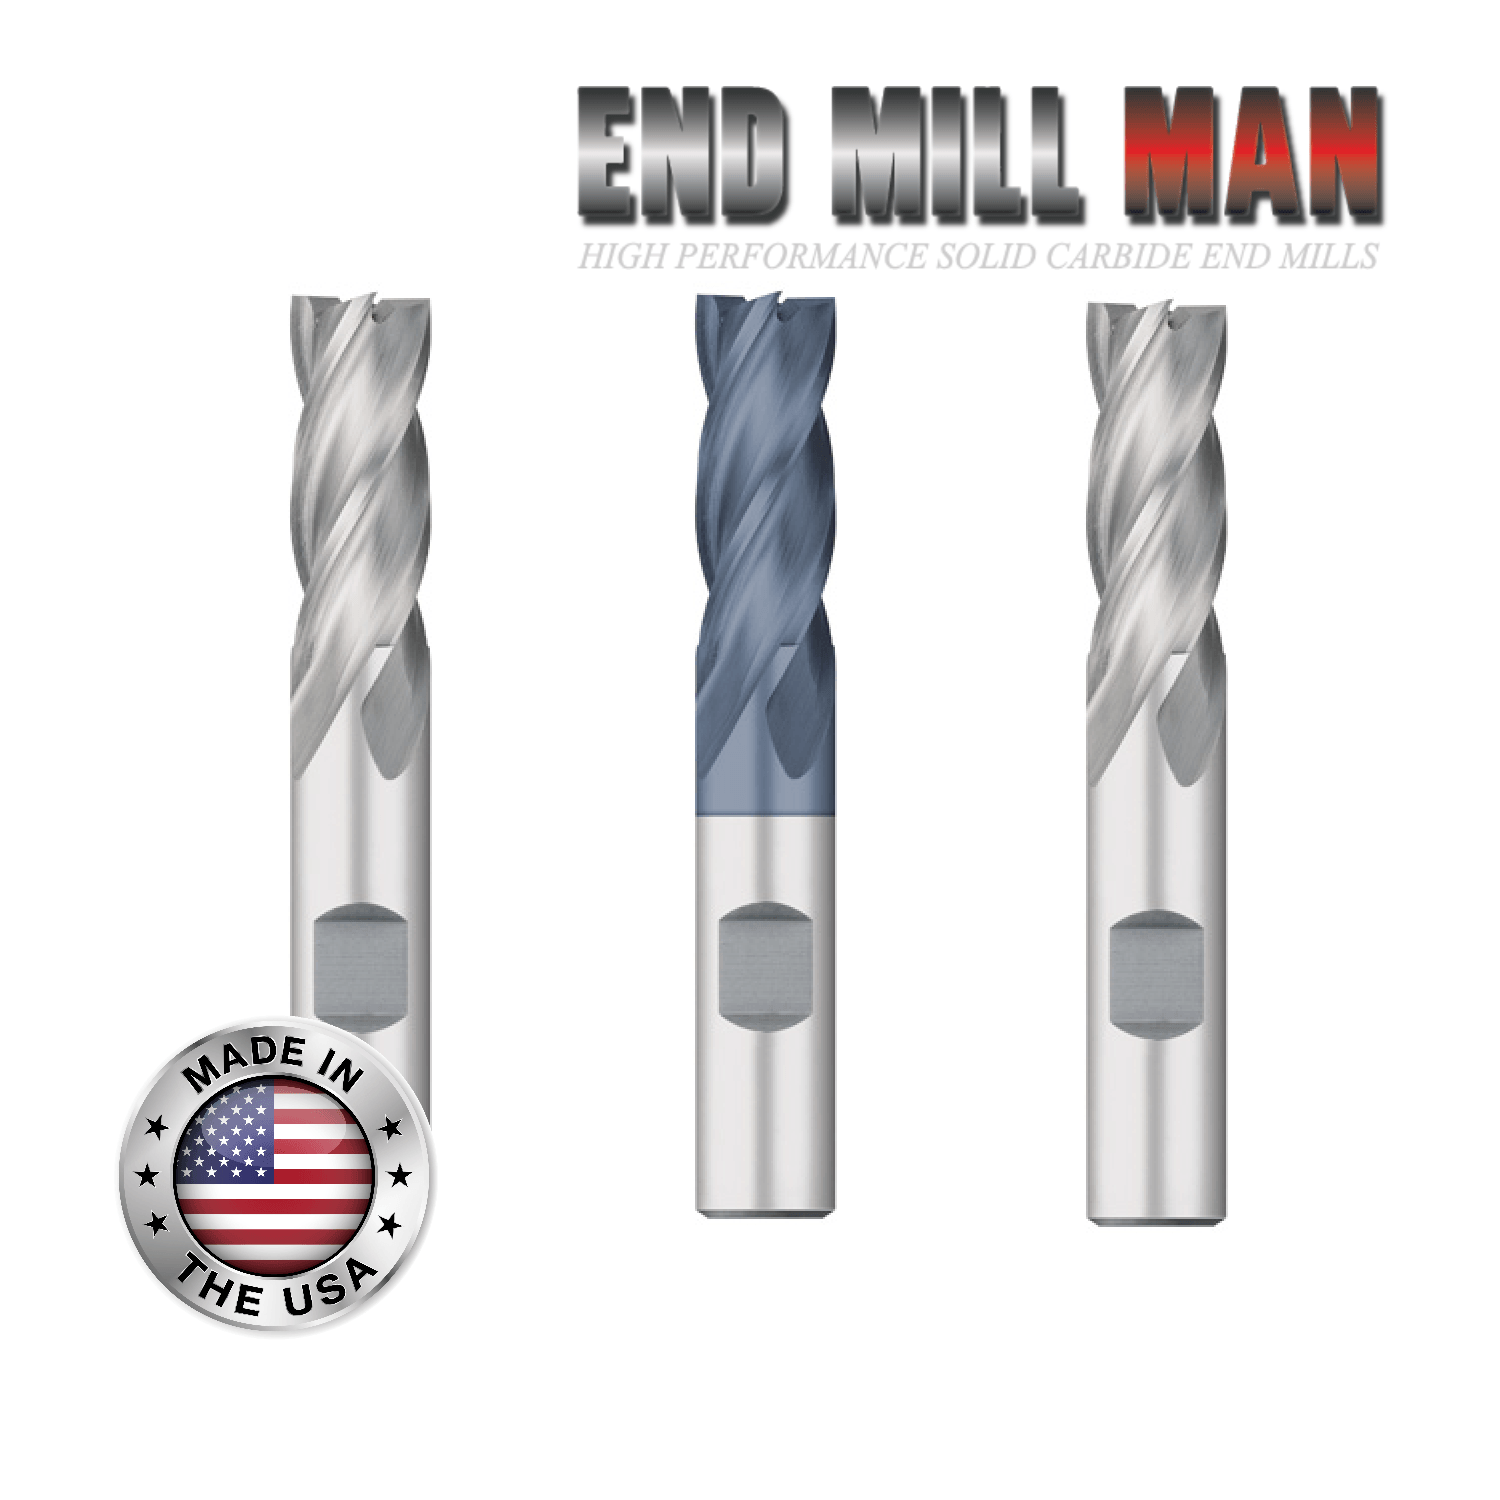 7/32" x 5/8" LOC (3 Pack) HSS 4 Flute End Mills (3/8" Shanks) - The End Mill Store 